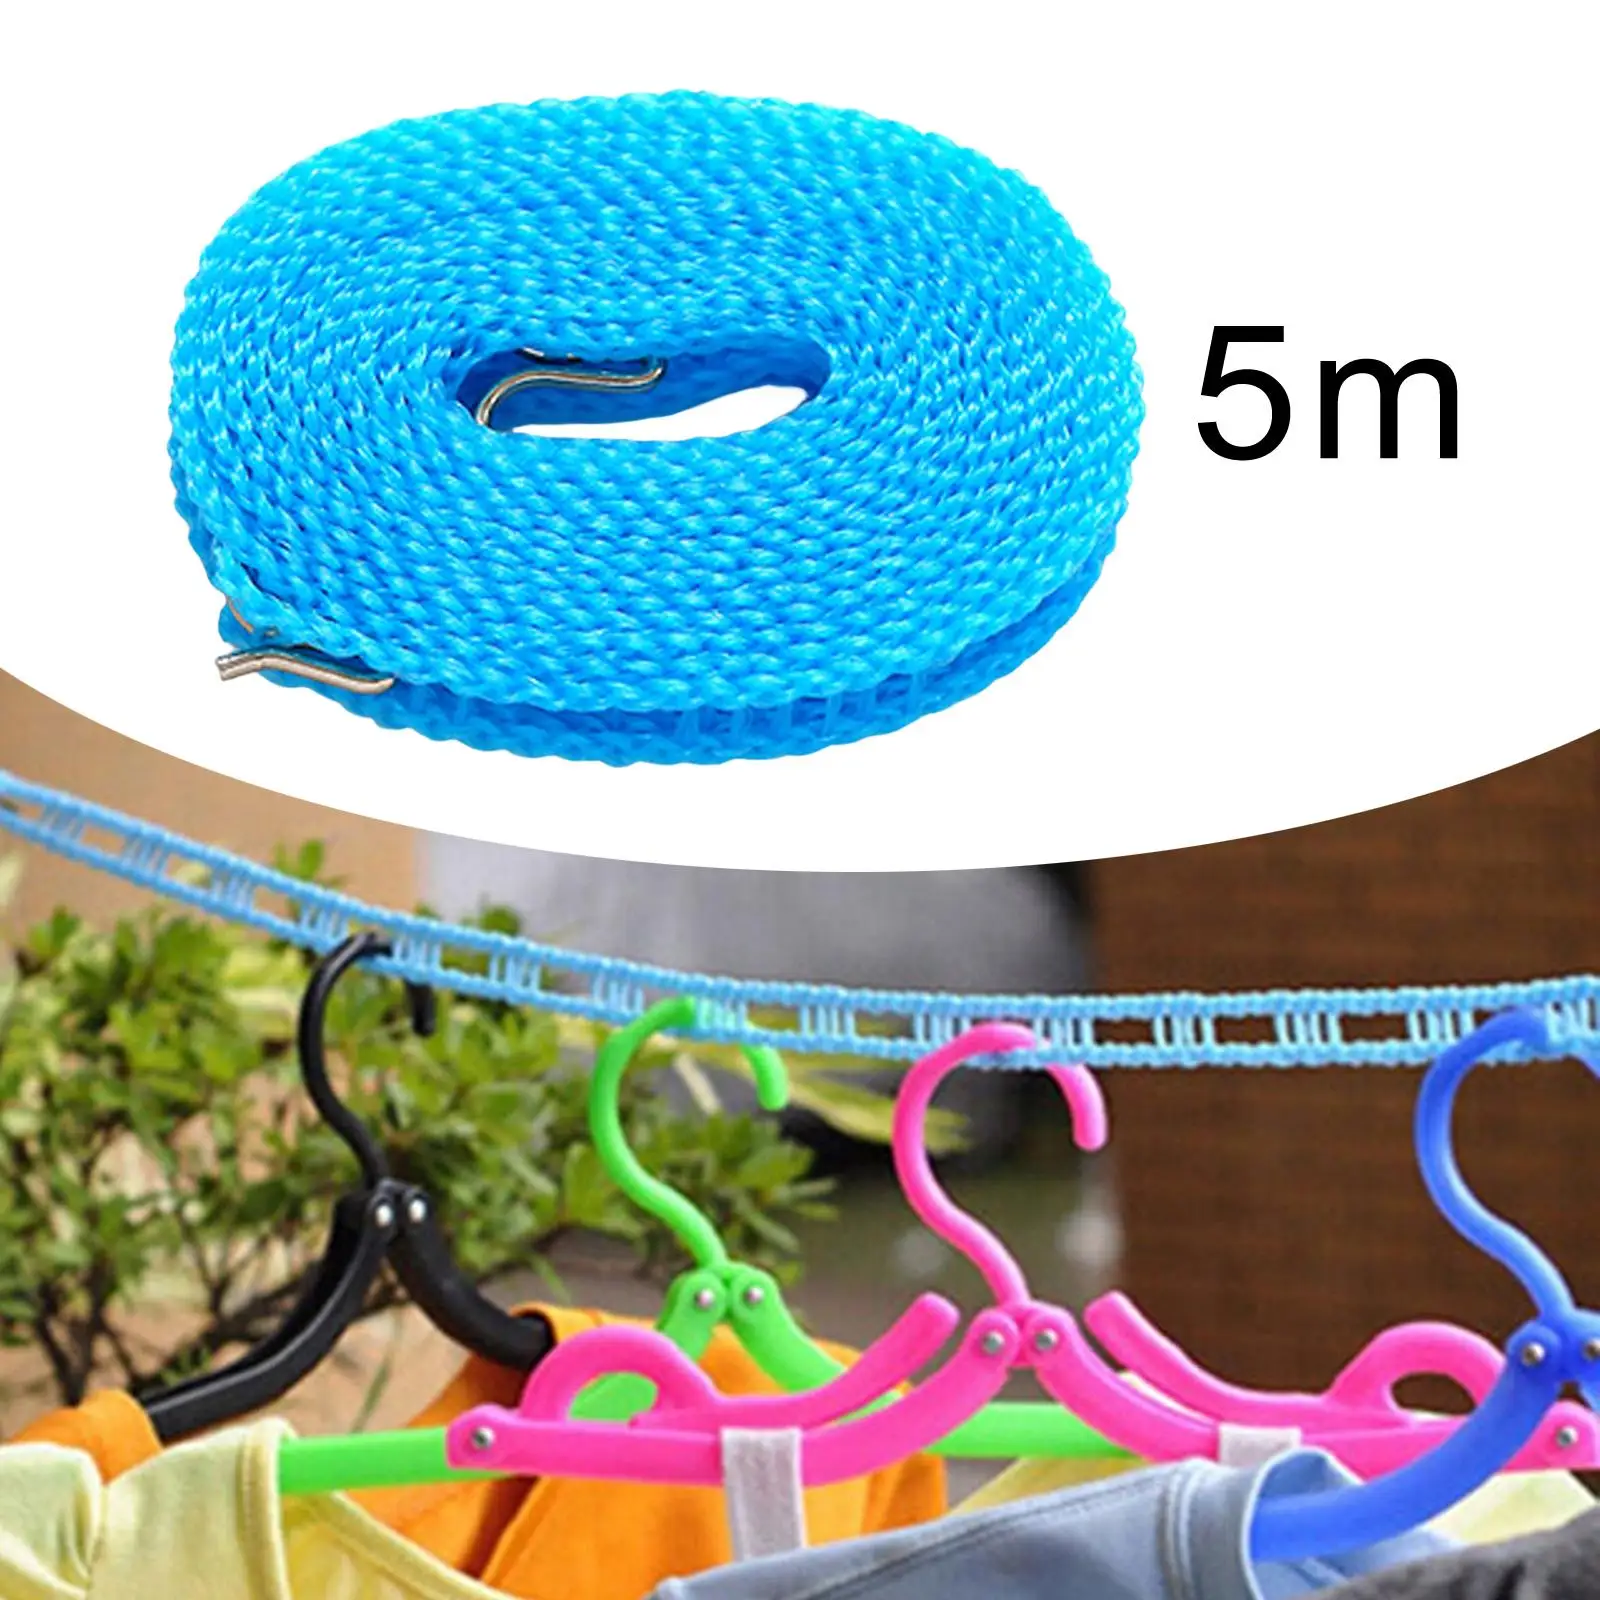 Clothesline Stretchy Windproof Laundry Cord Drying Clothes Line for Camping Accessories Hotel Indoor or Outdoor Garden